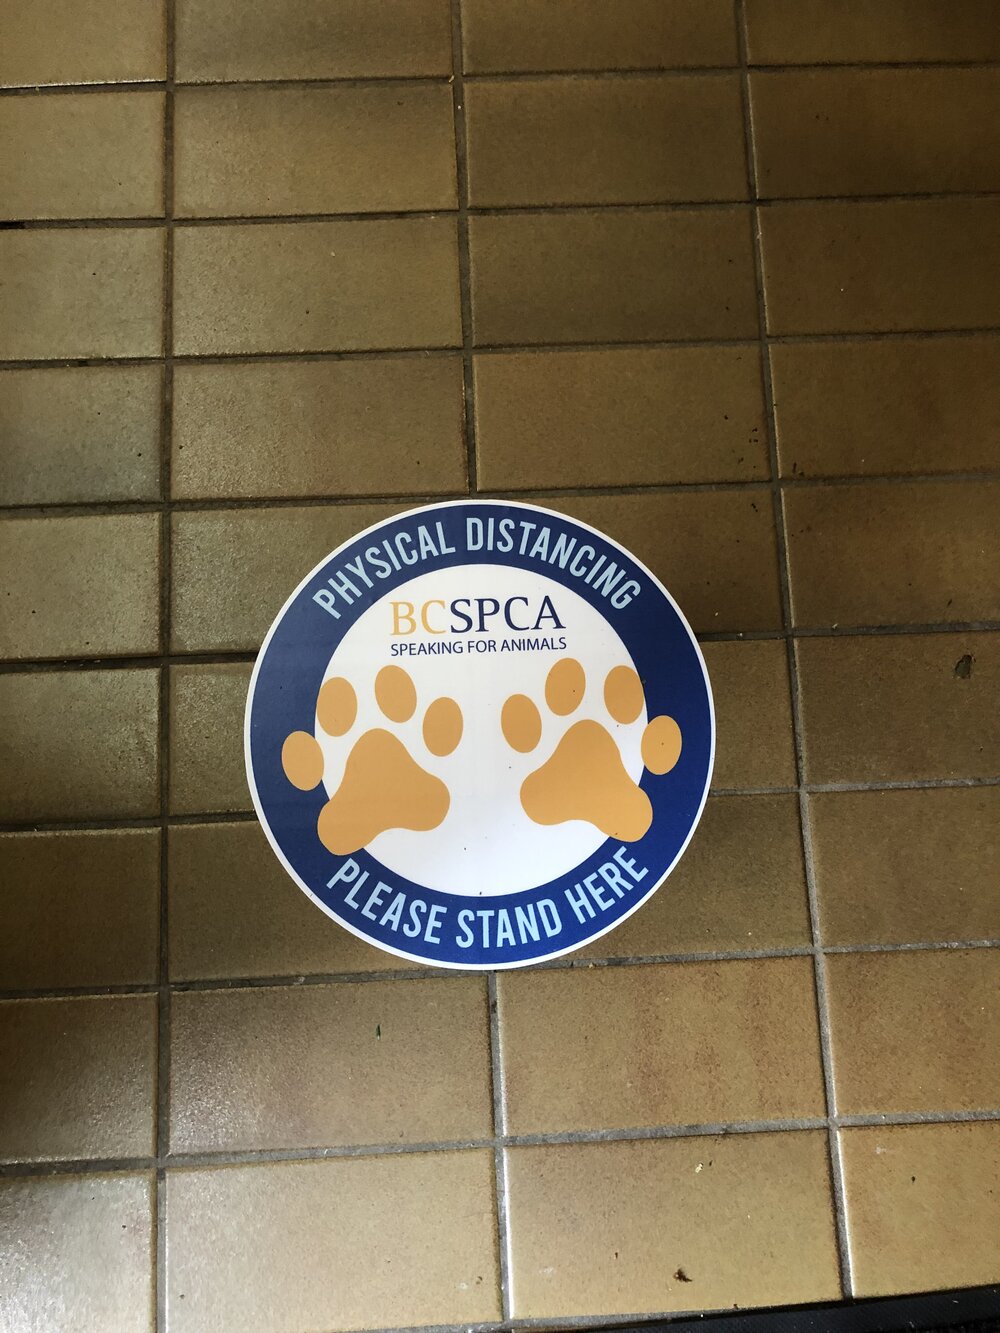 Custom floor decals for the BCSPCA designed, printed and installed by Blast Media Print